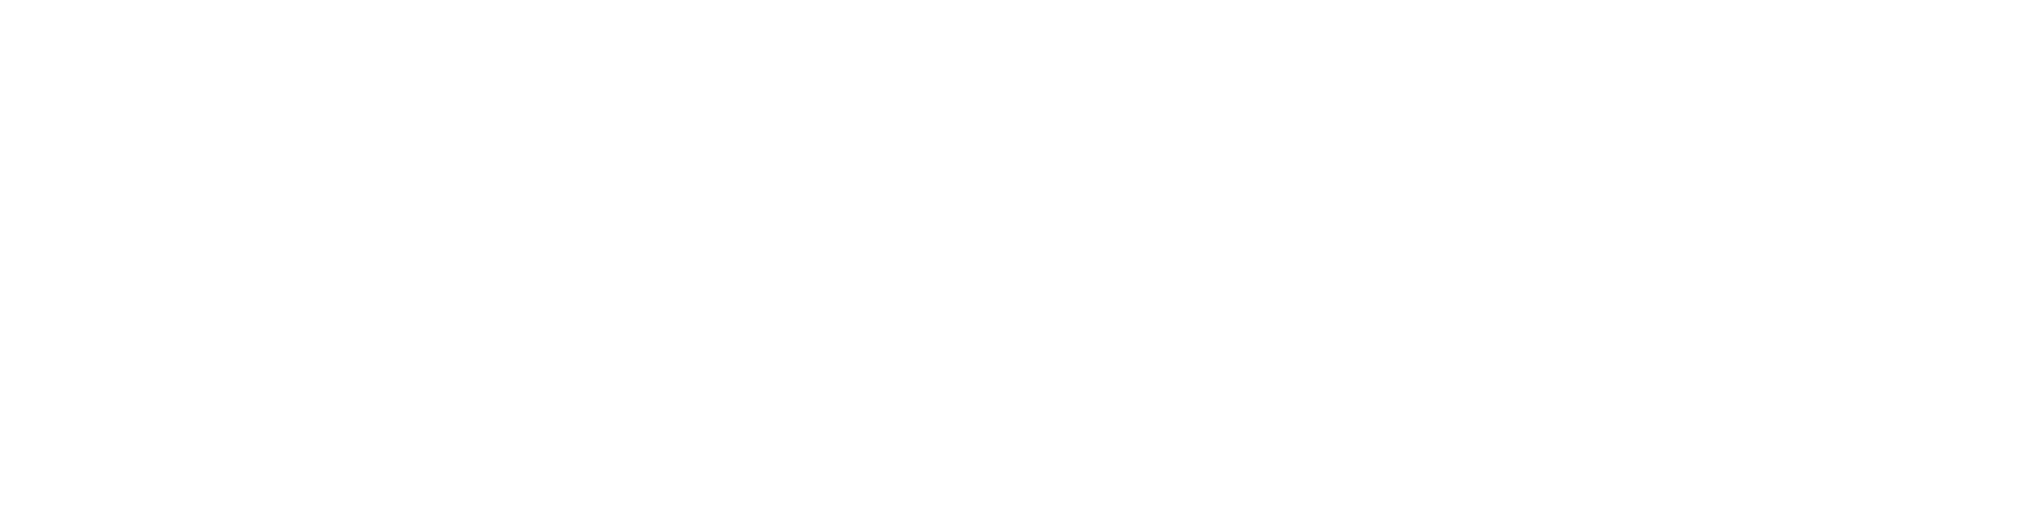 Riding the Phoenix Part III - How Your Soul Takes Flight